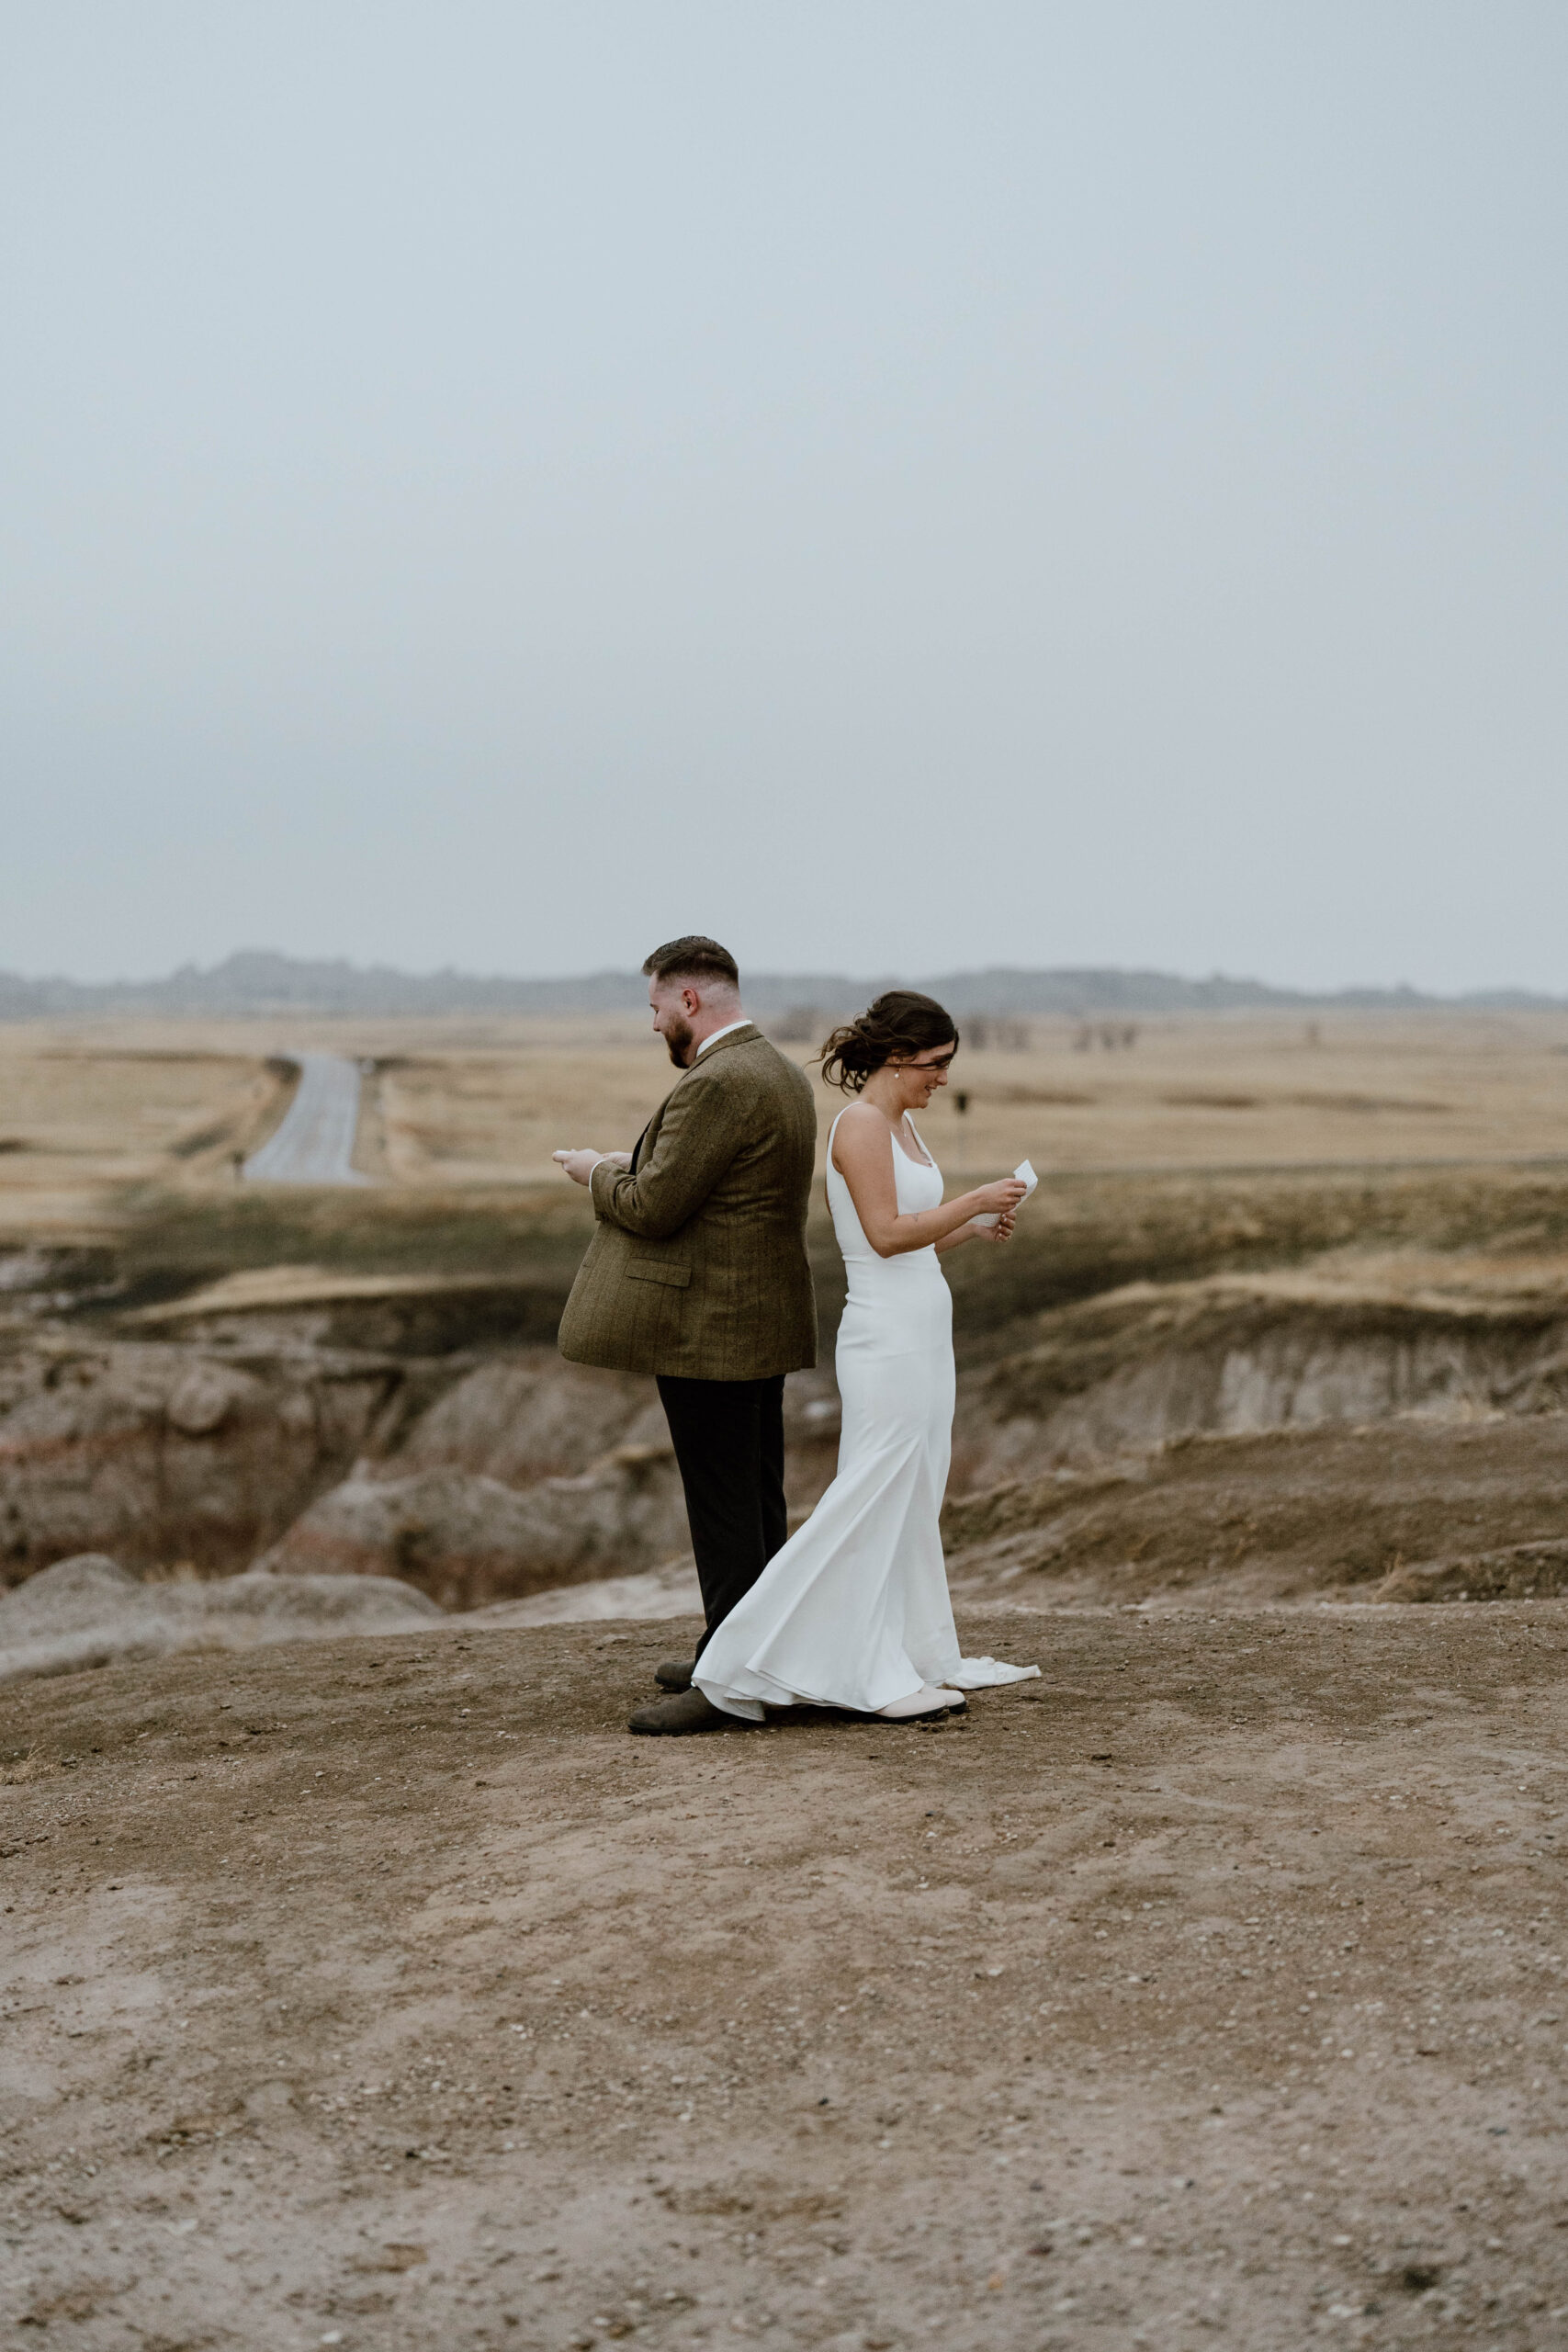 A couple is seen reading vows in a national park